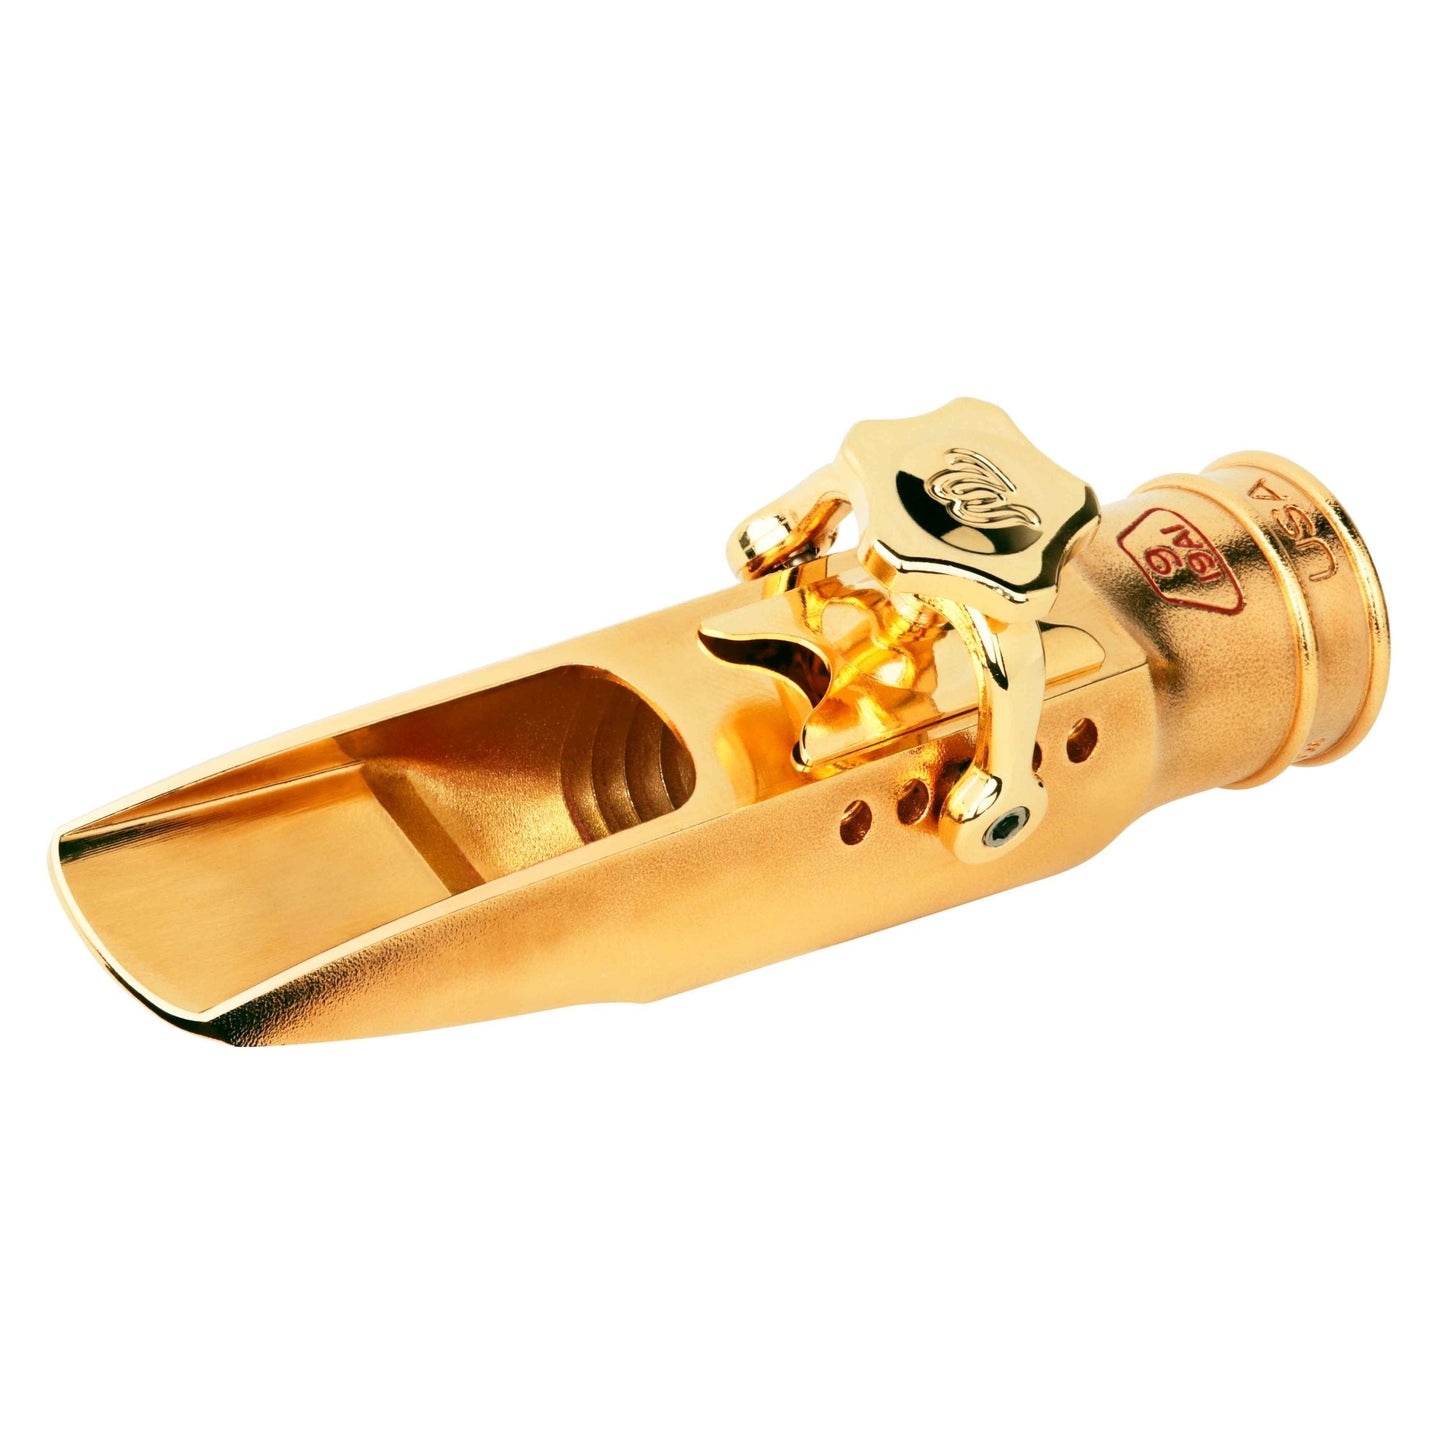 Theo Wanne Shiva 3 Tenor Saxophone Gold Plated Mouthpiece - Premium  from Theo Wanne - Just $775! Shop now at Poppa's Music